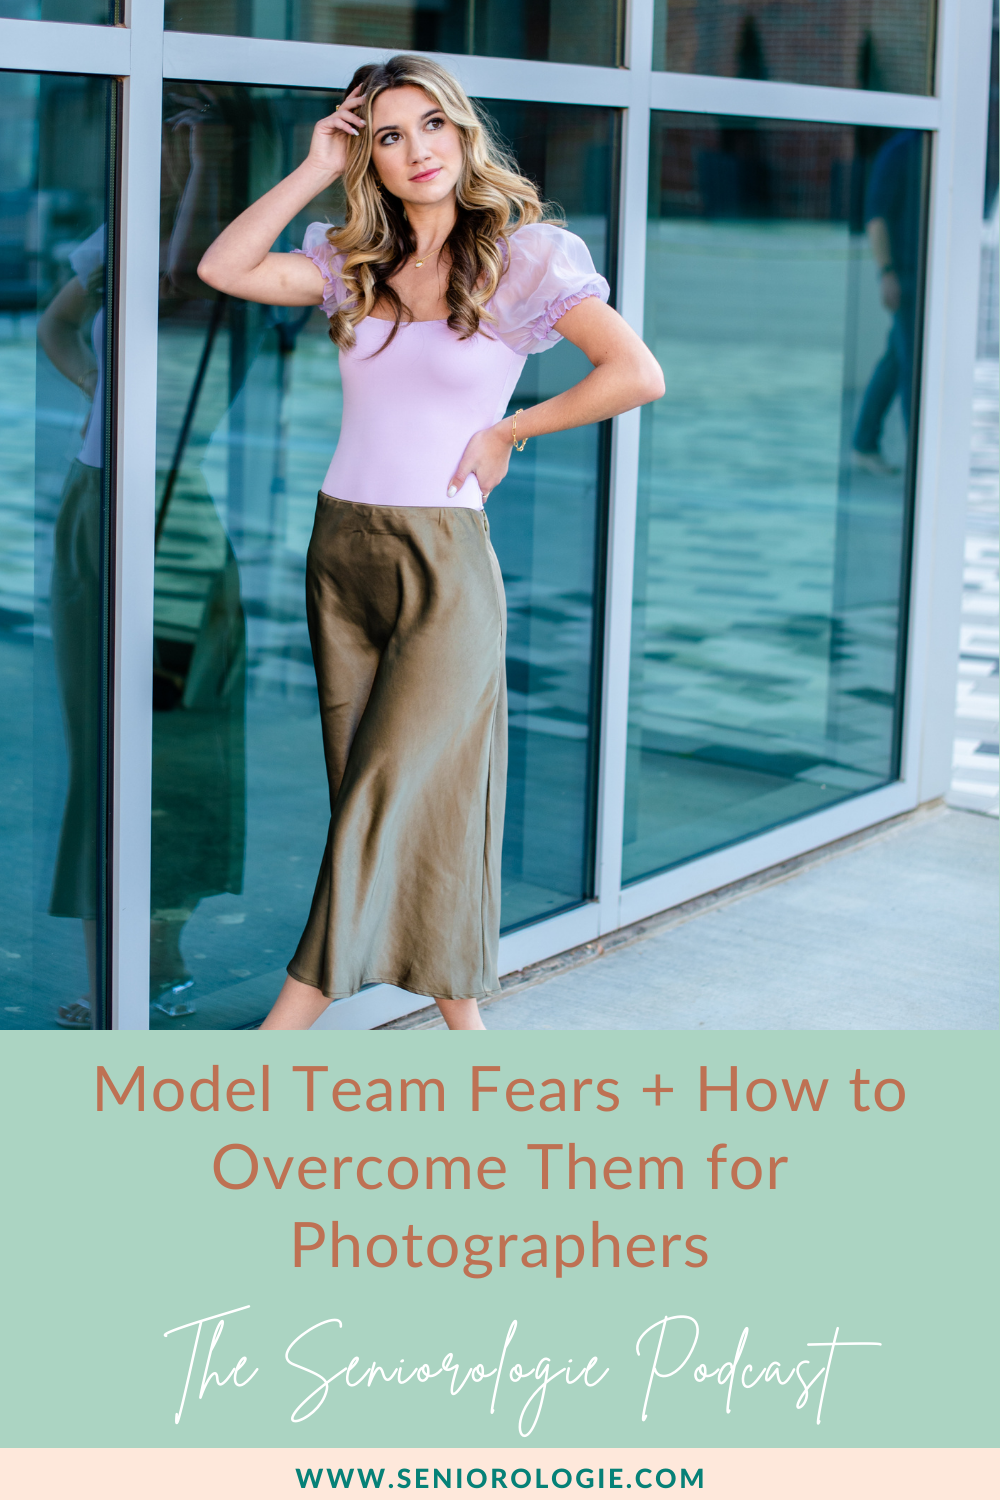 Model team fears and how to overcome them: tips to launch your first senior spokesmodel team as a senior portrait photographer